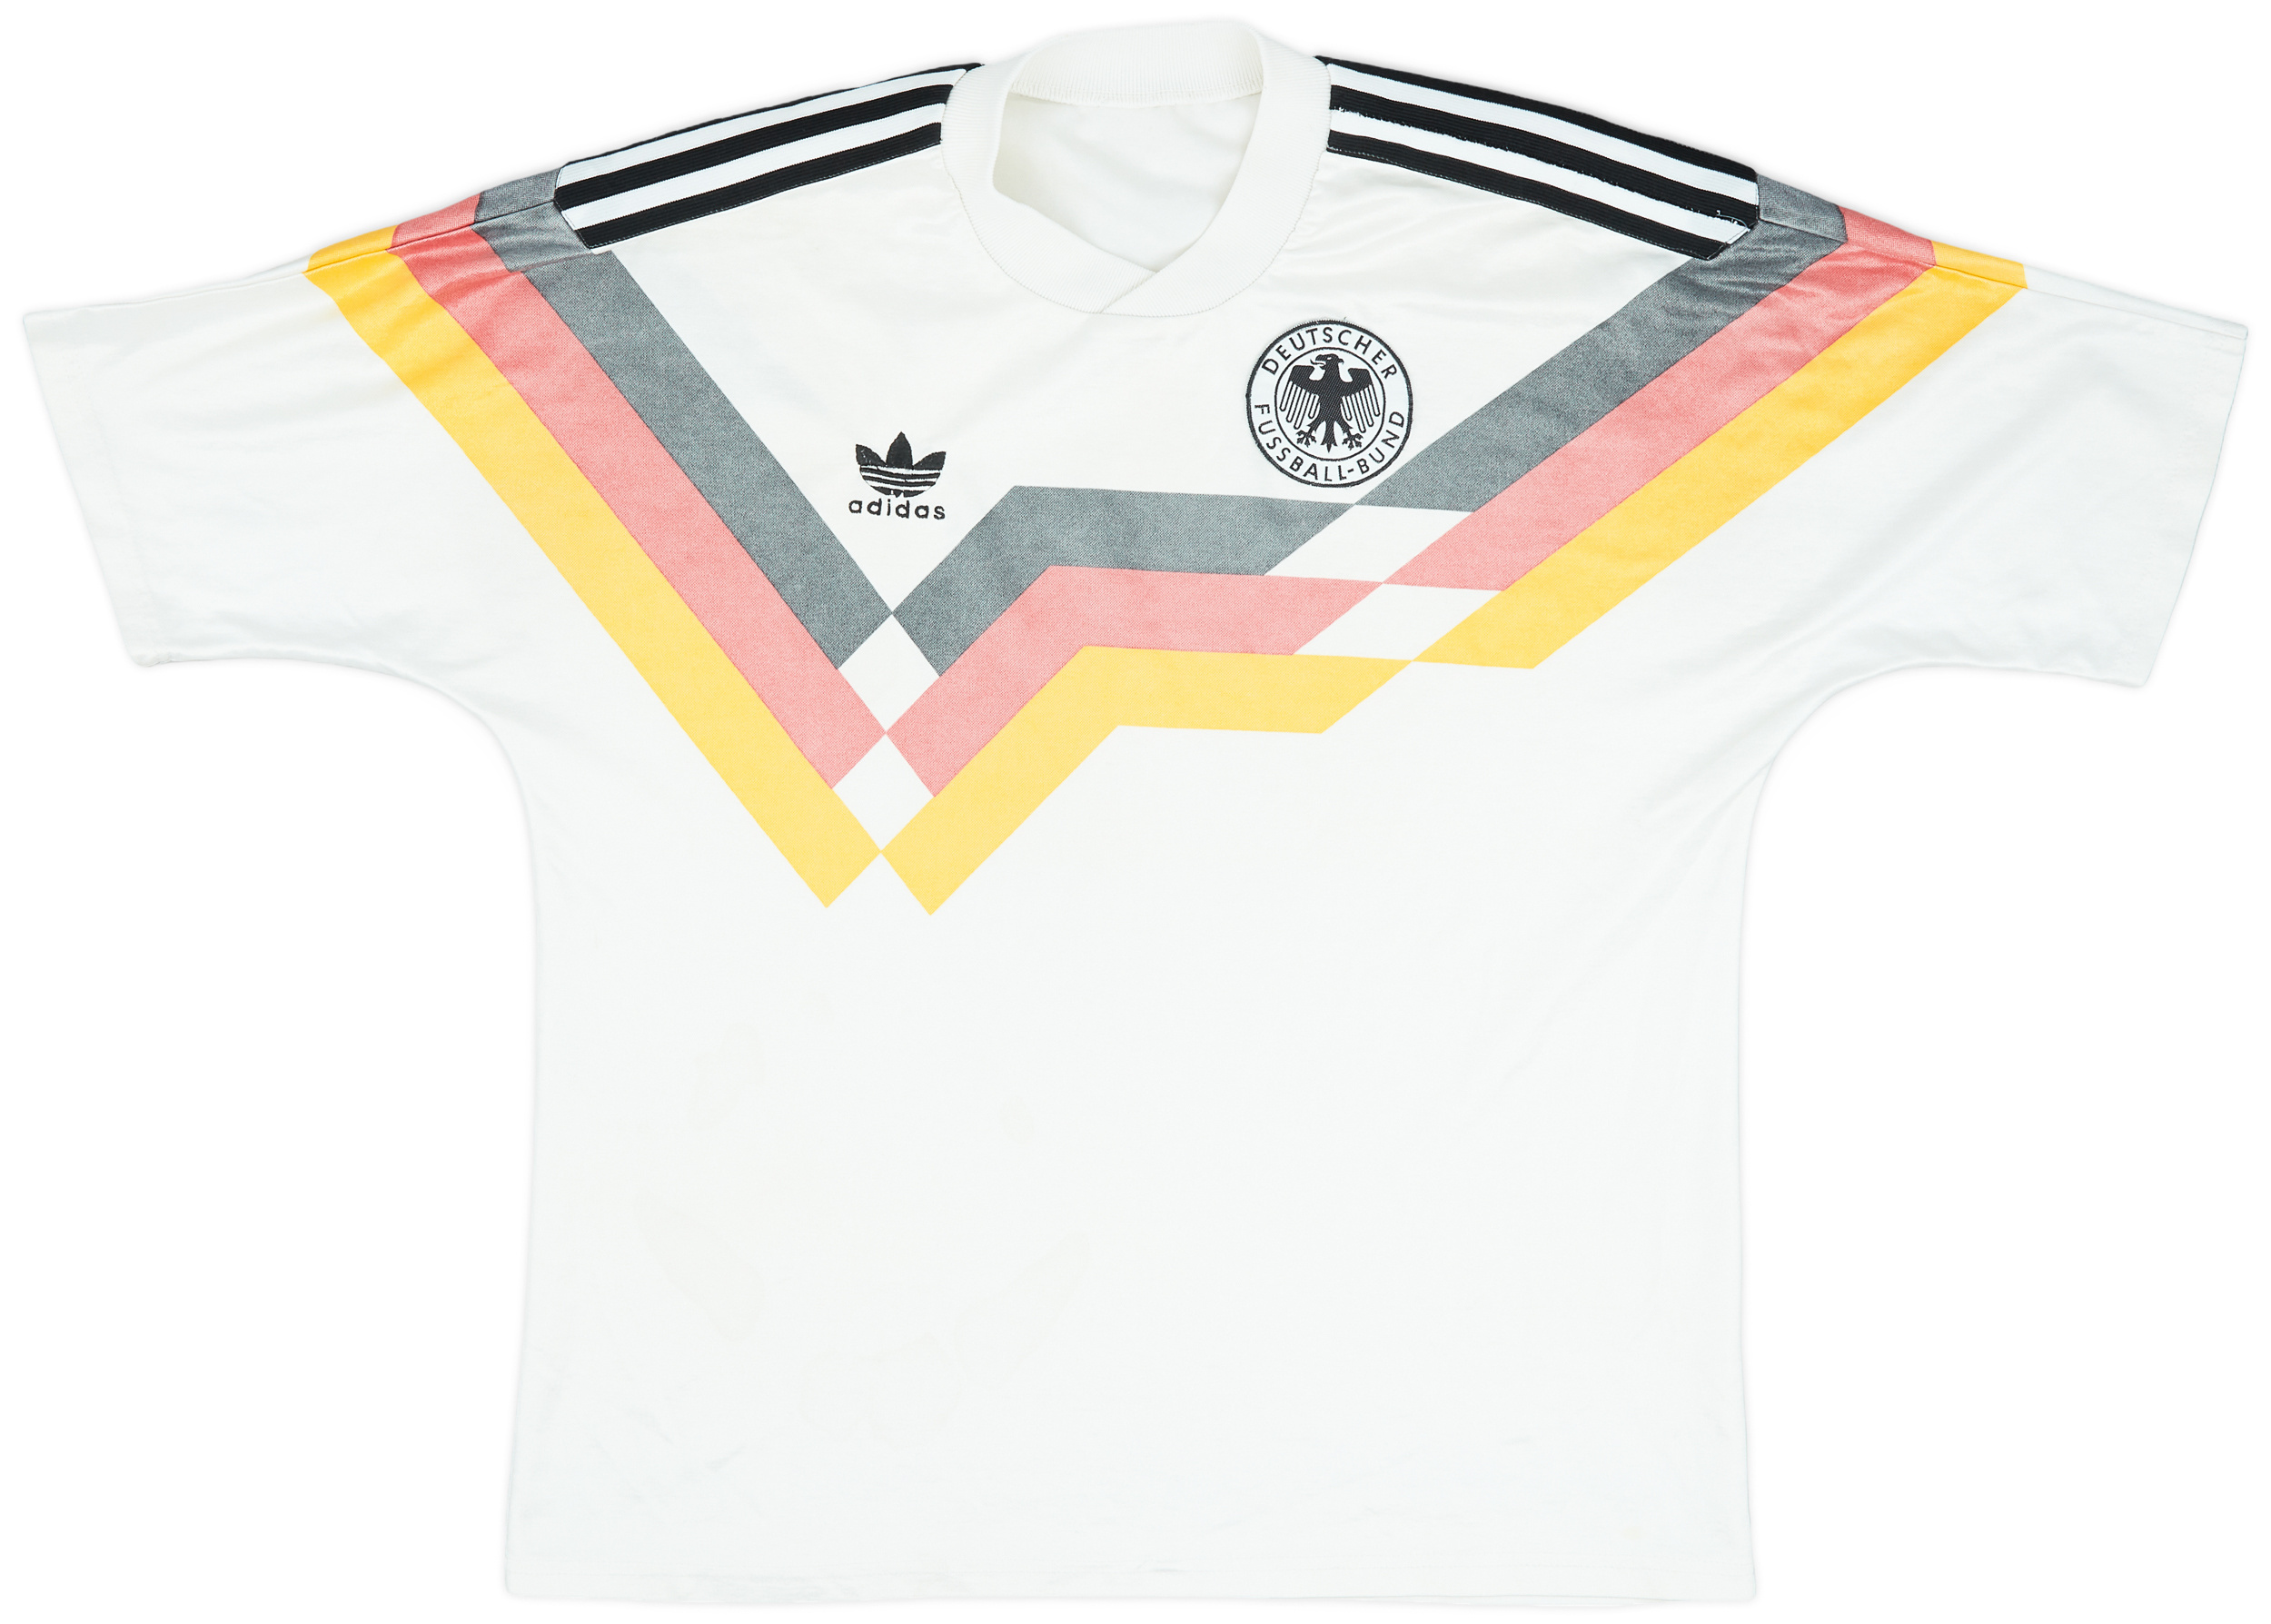 1988-91 West Germany Home Shirt - 4/10 - ()